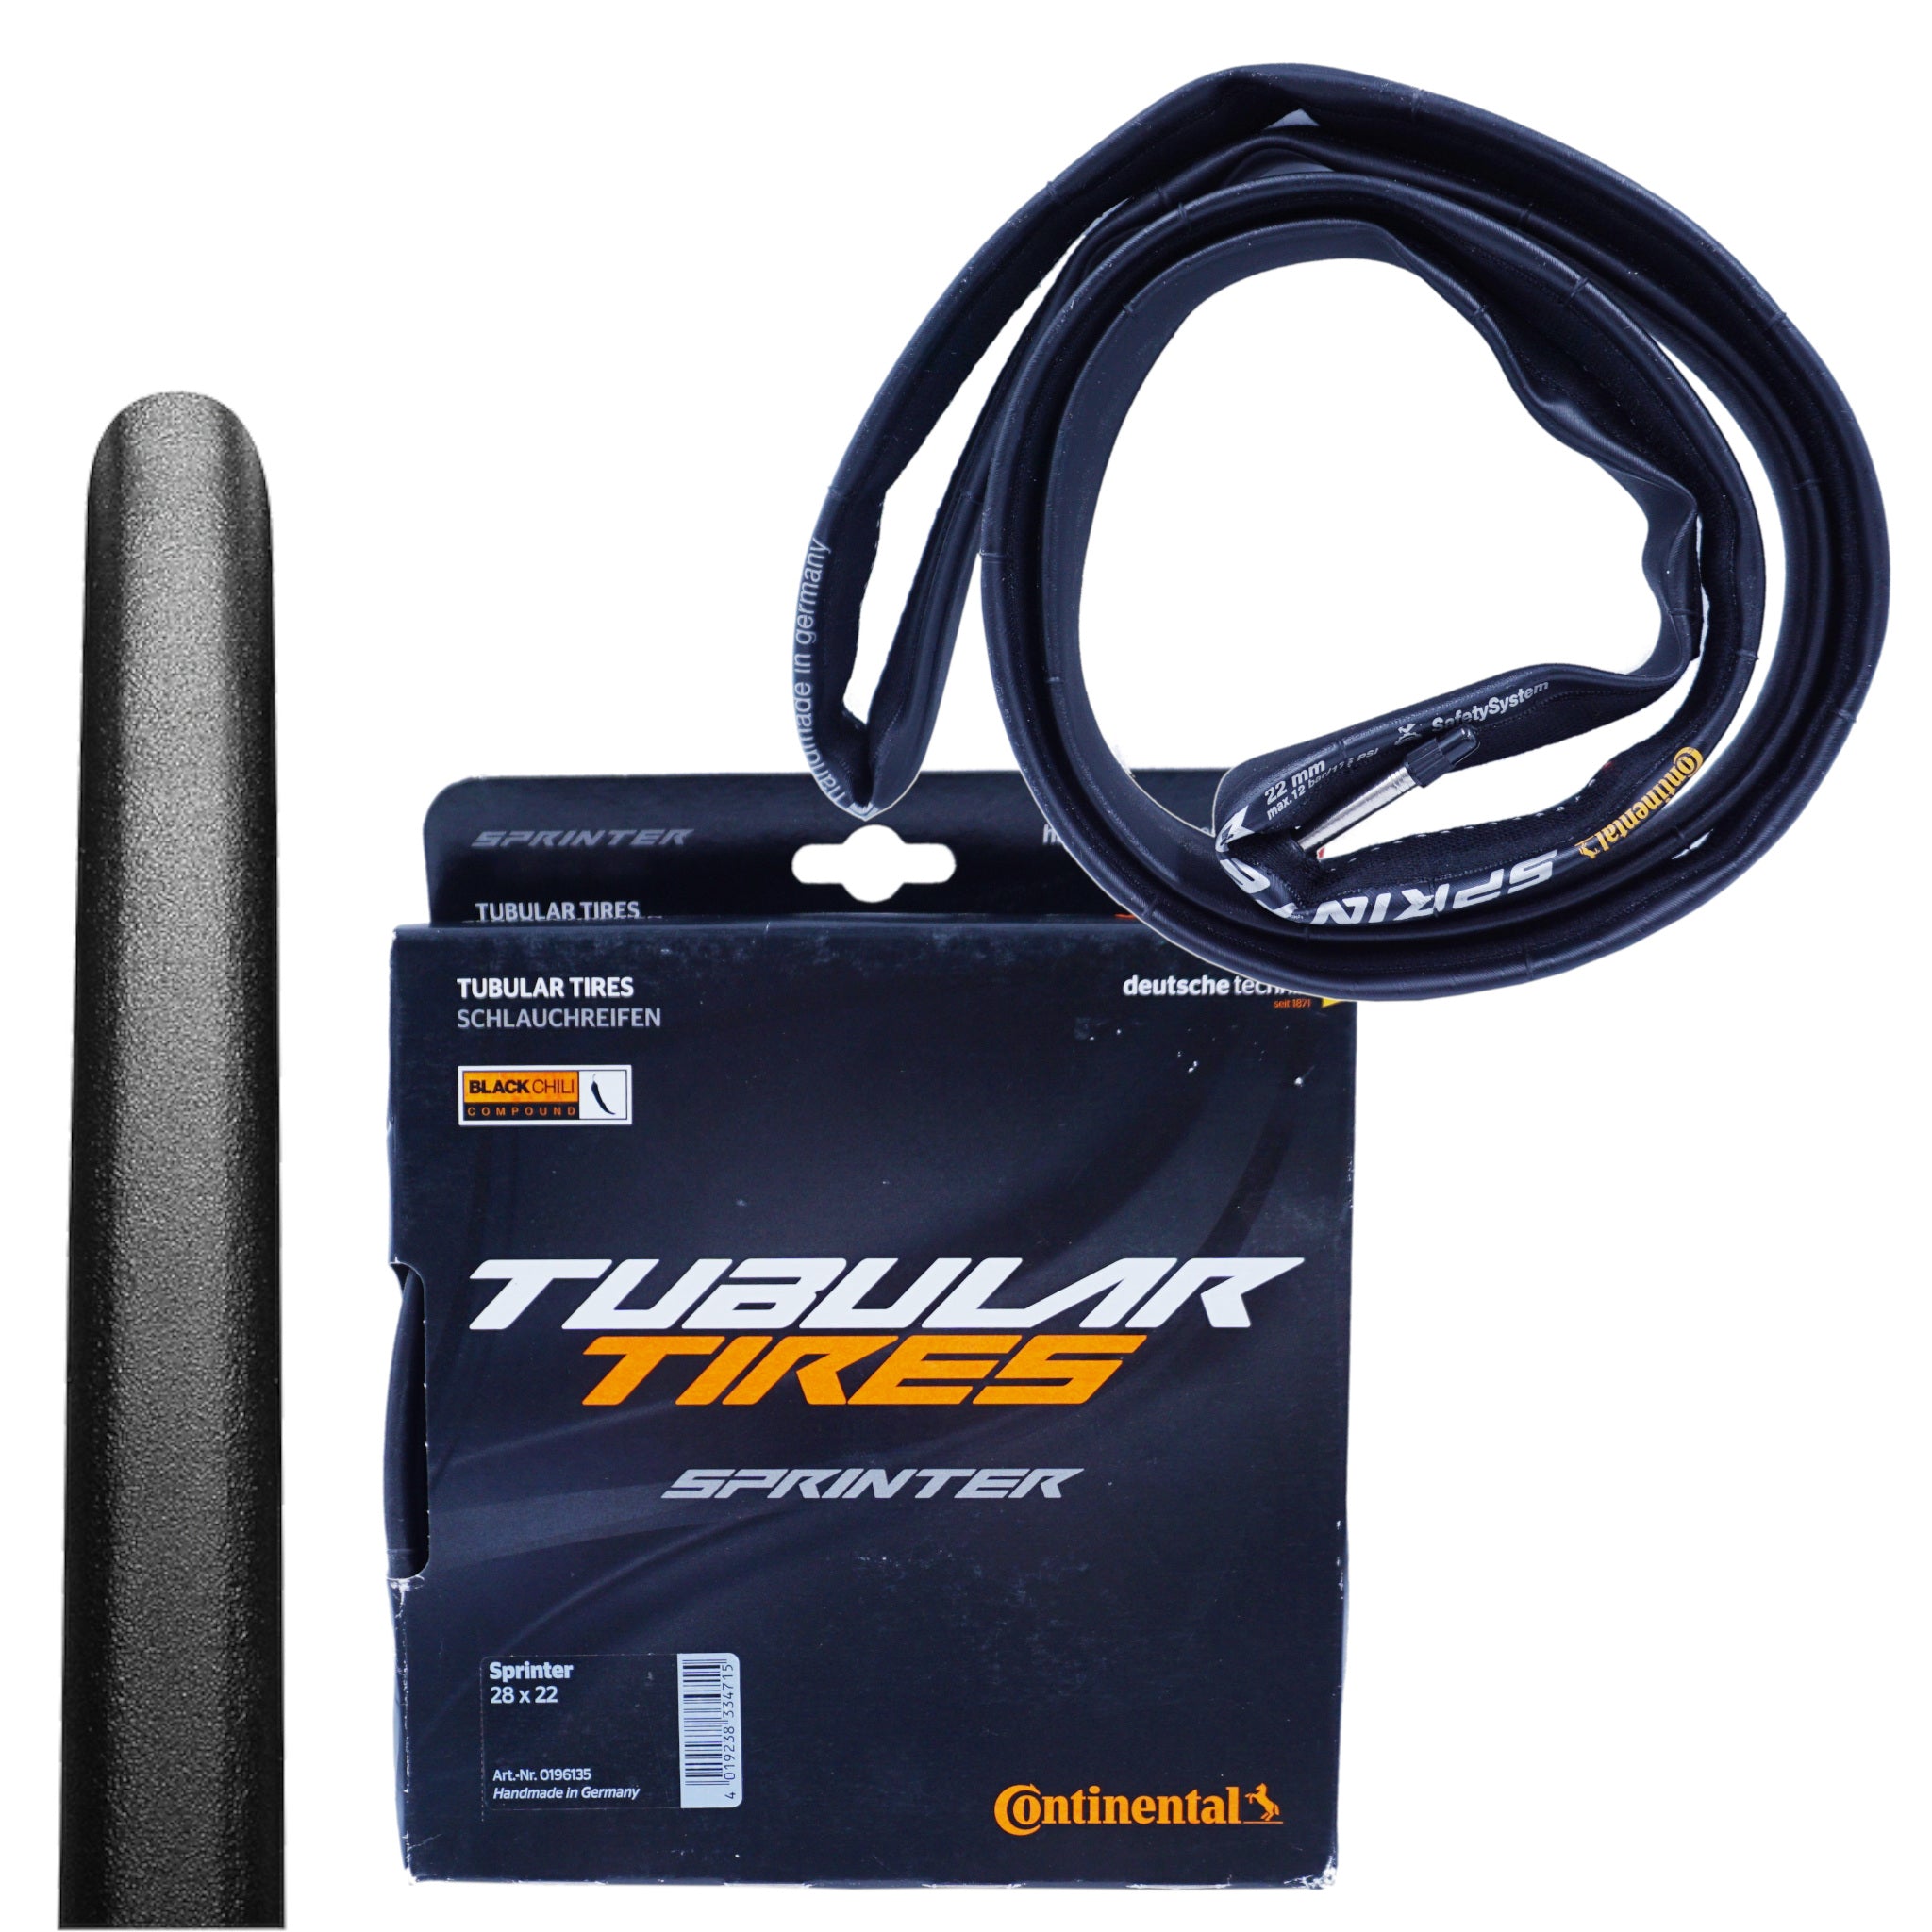 Continental Sprinter Tubular Tire 700x22 Puncture Protected Tire - The Bikesmiths